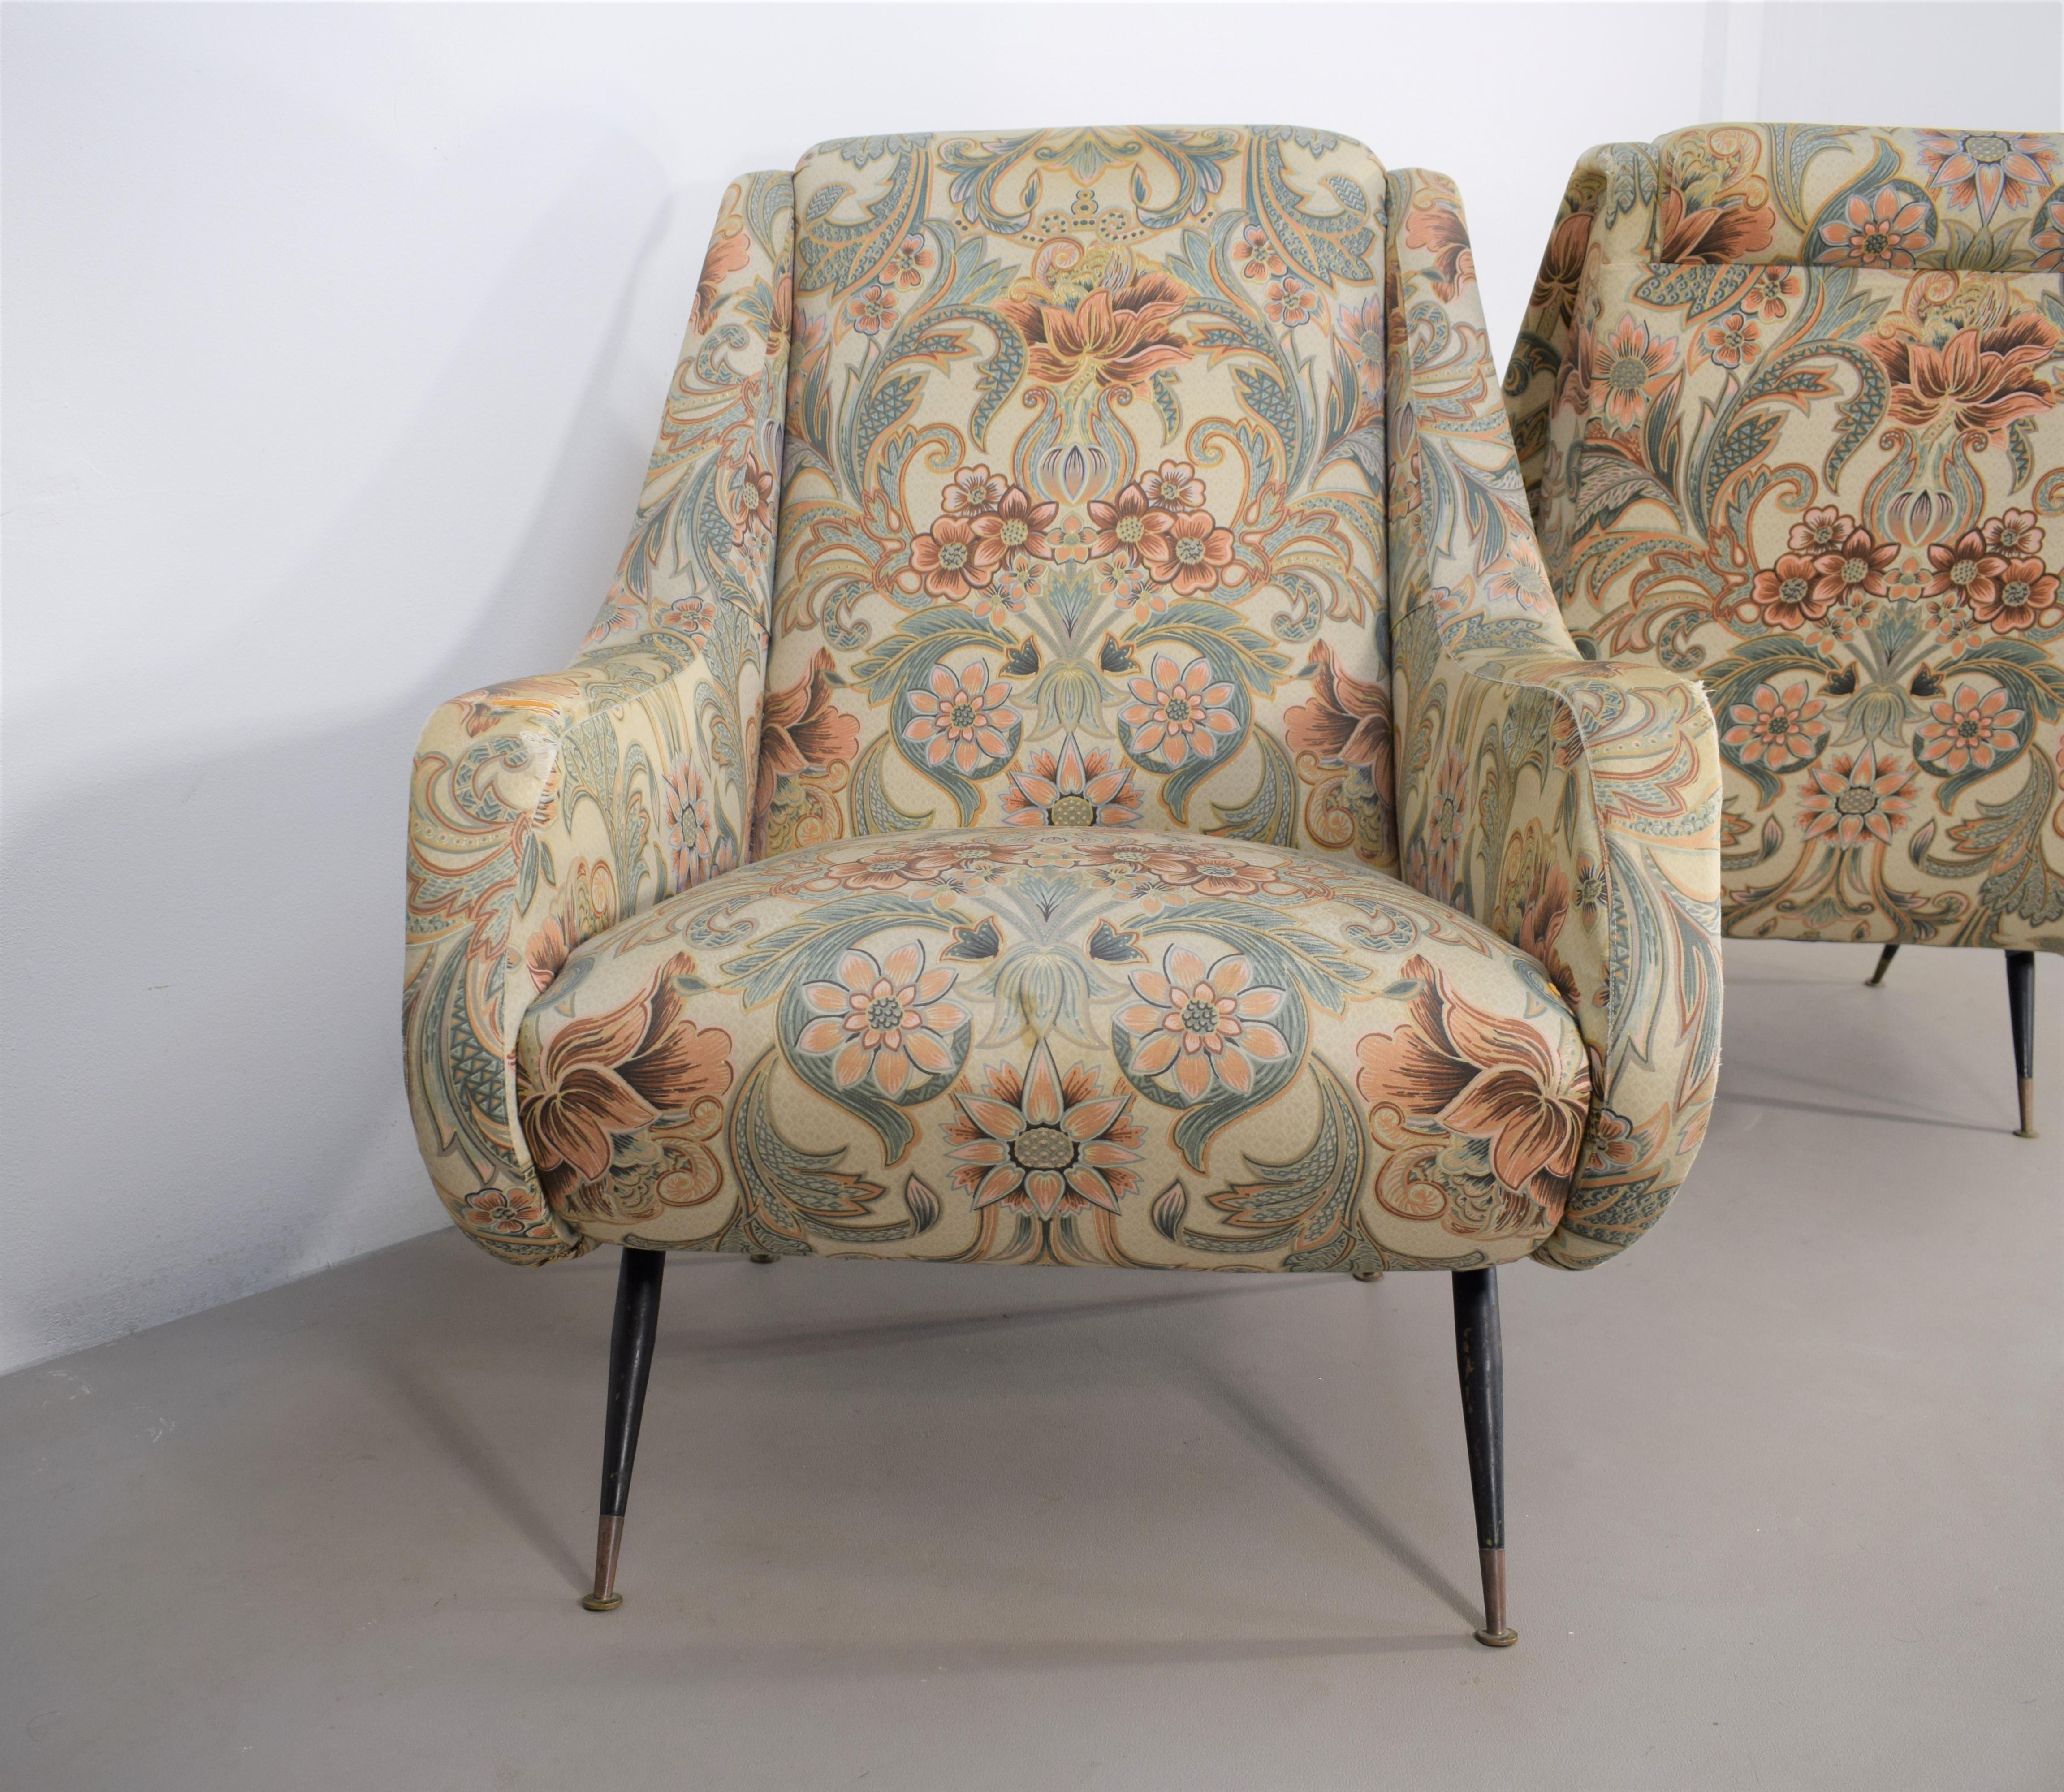 Pair of Italian Armchairs by Aldo Morbelli for Isa, 1950s For Sale 1